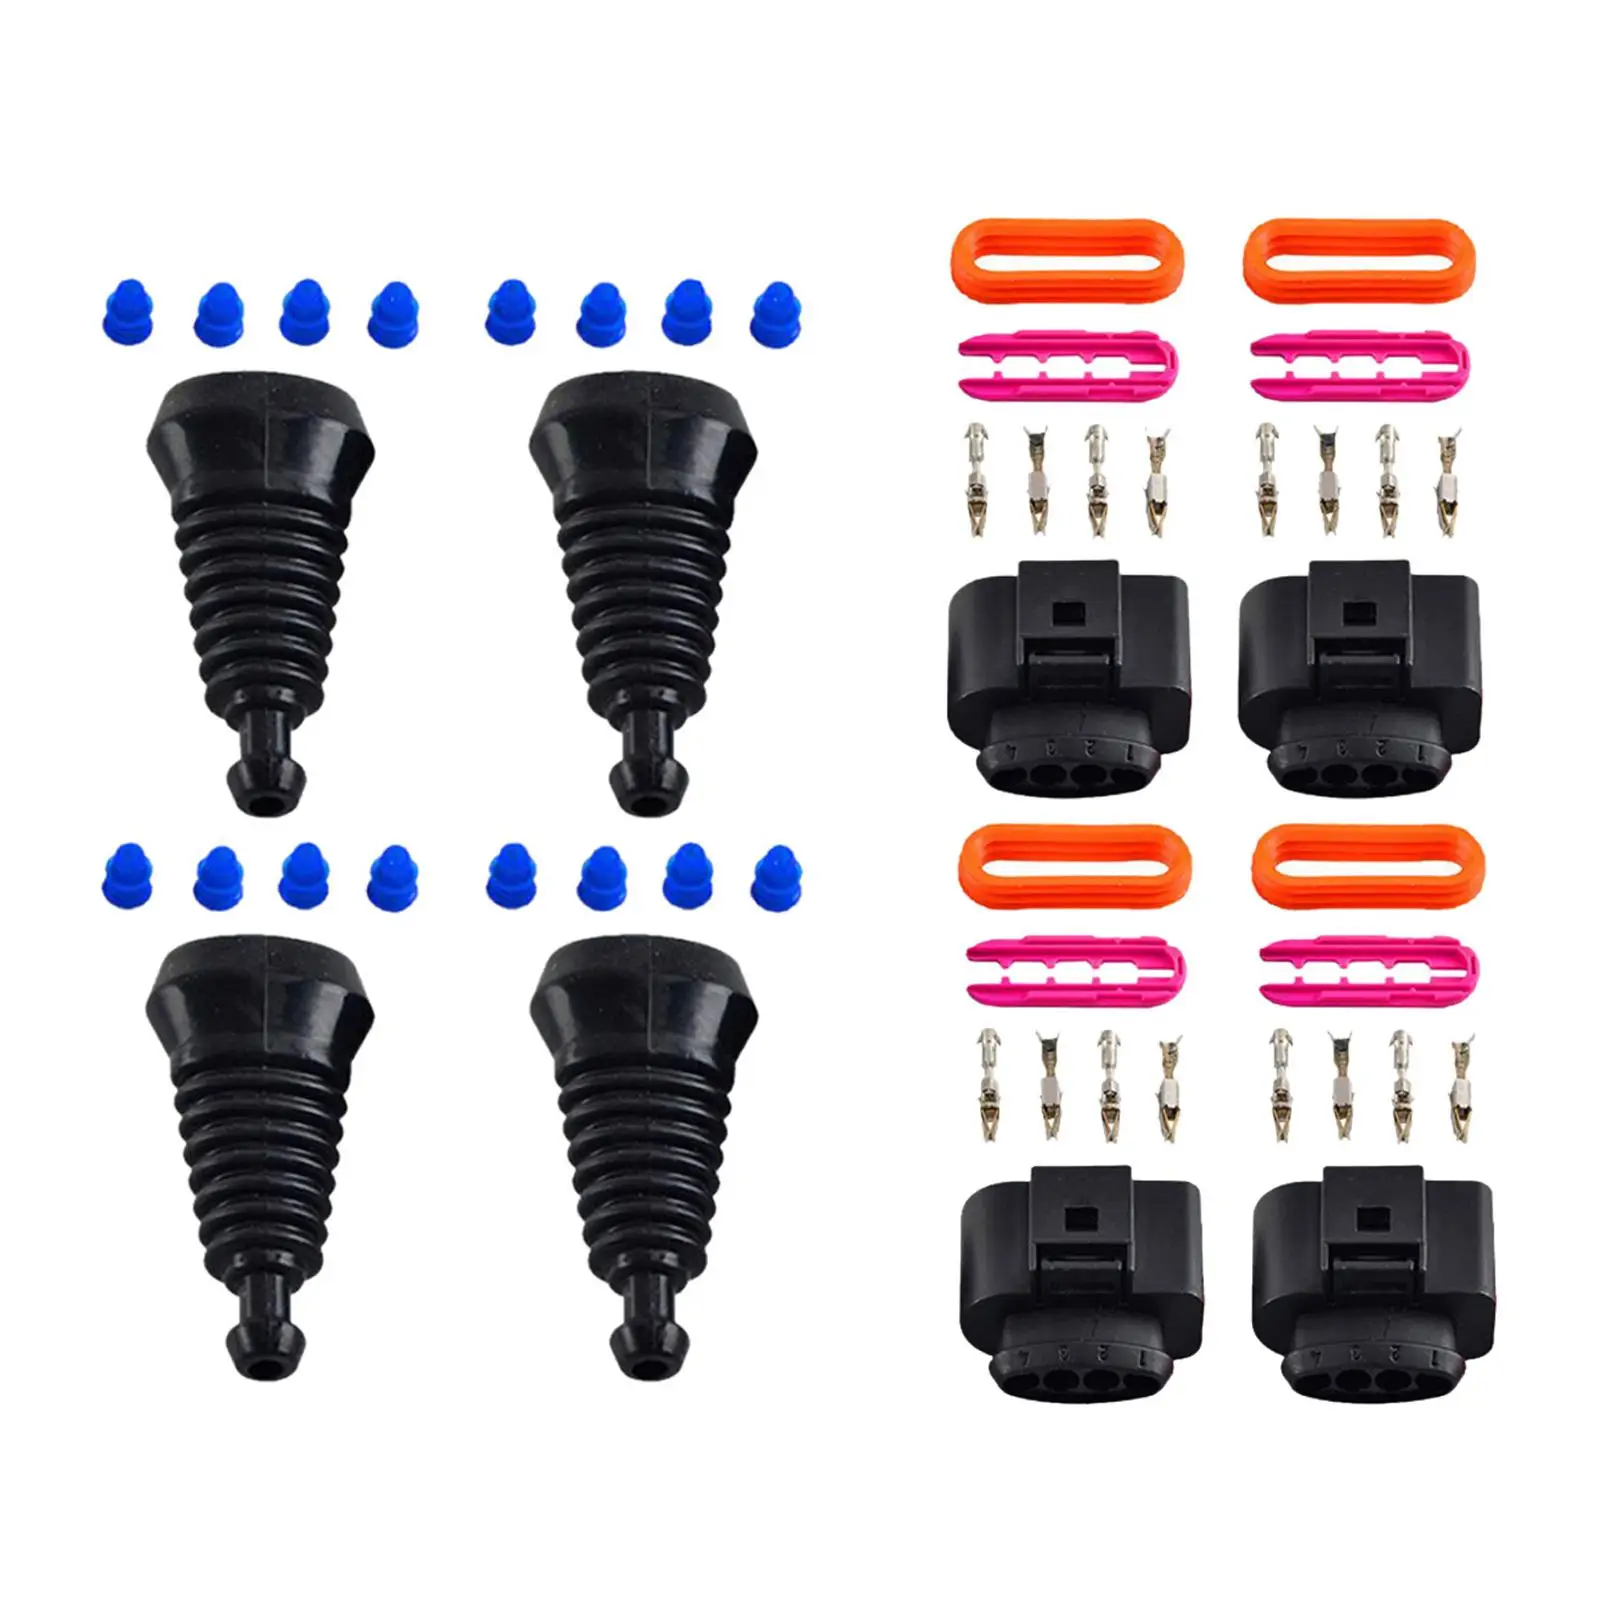 4Pcs Ignition Coil Connector Easy Installation Plug Wire Repair Kit Heavy Duty for A4 1J0998724 Accessories 1J0973724 Parts